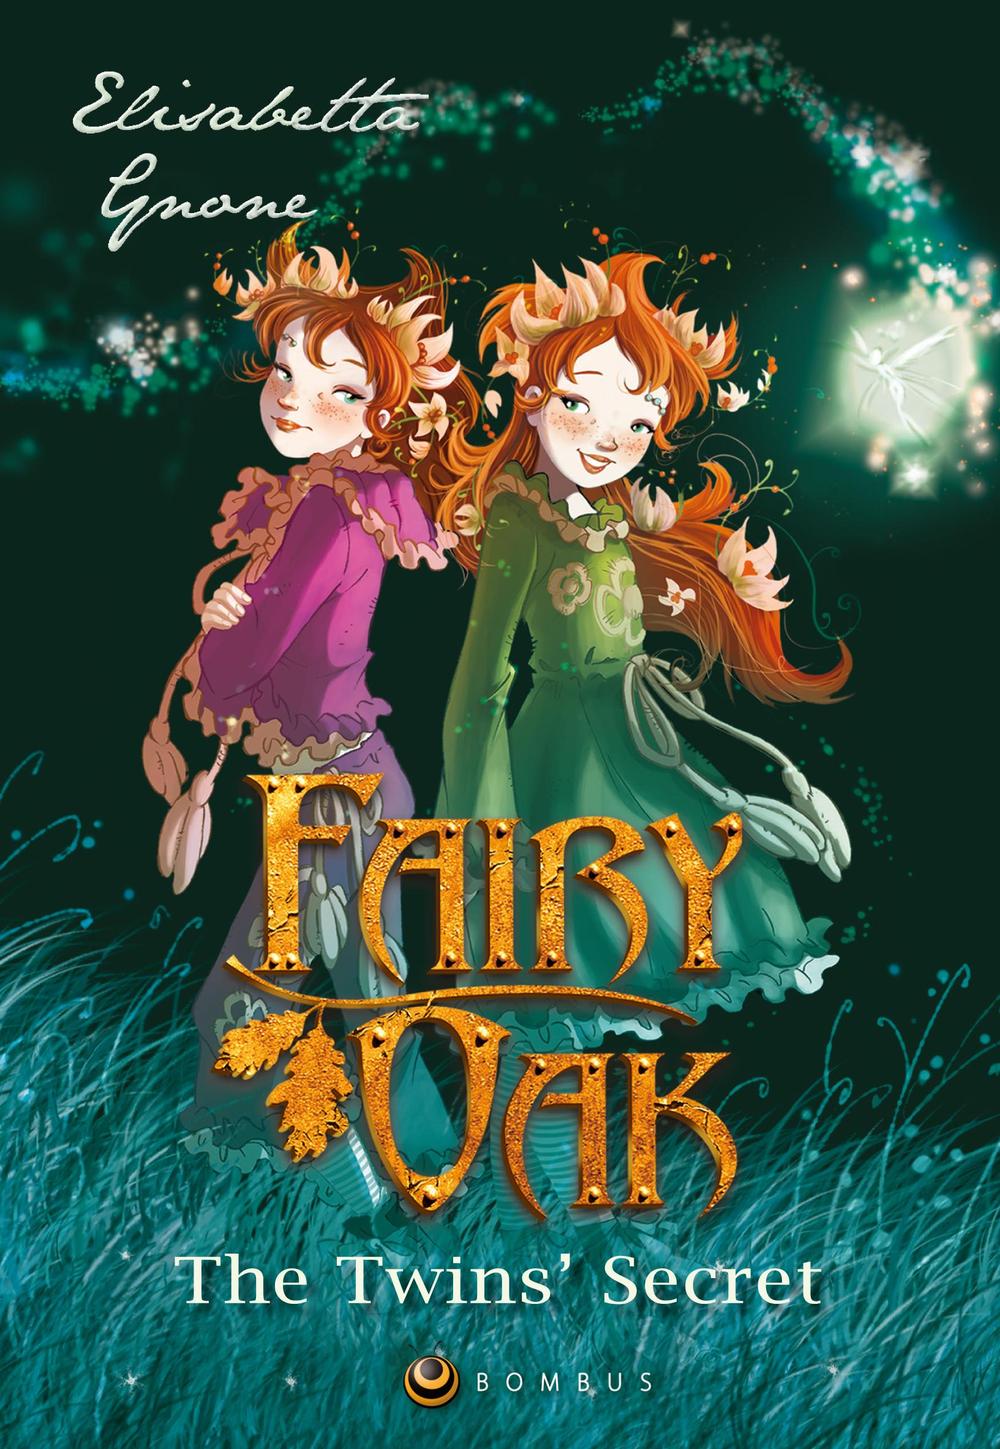 The twins' secret. The first chapter of the trilogy. Fairy Oak. Limited Edition. Signed by the Author. Ediz. speciale